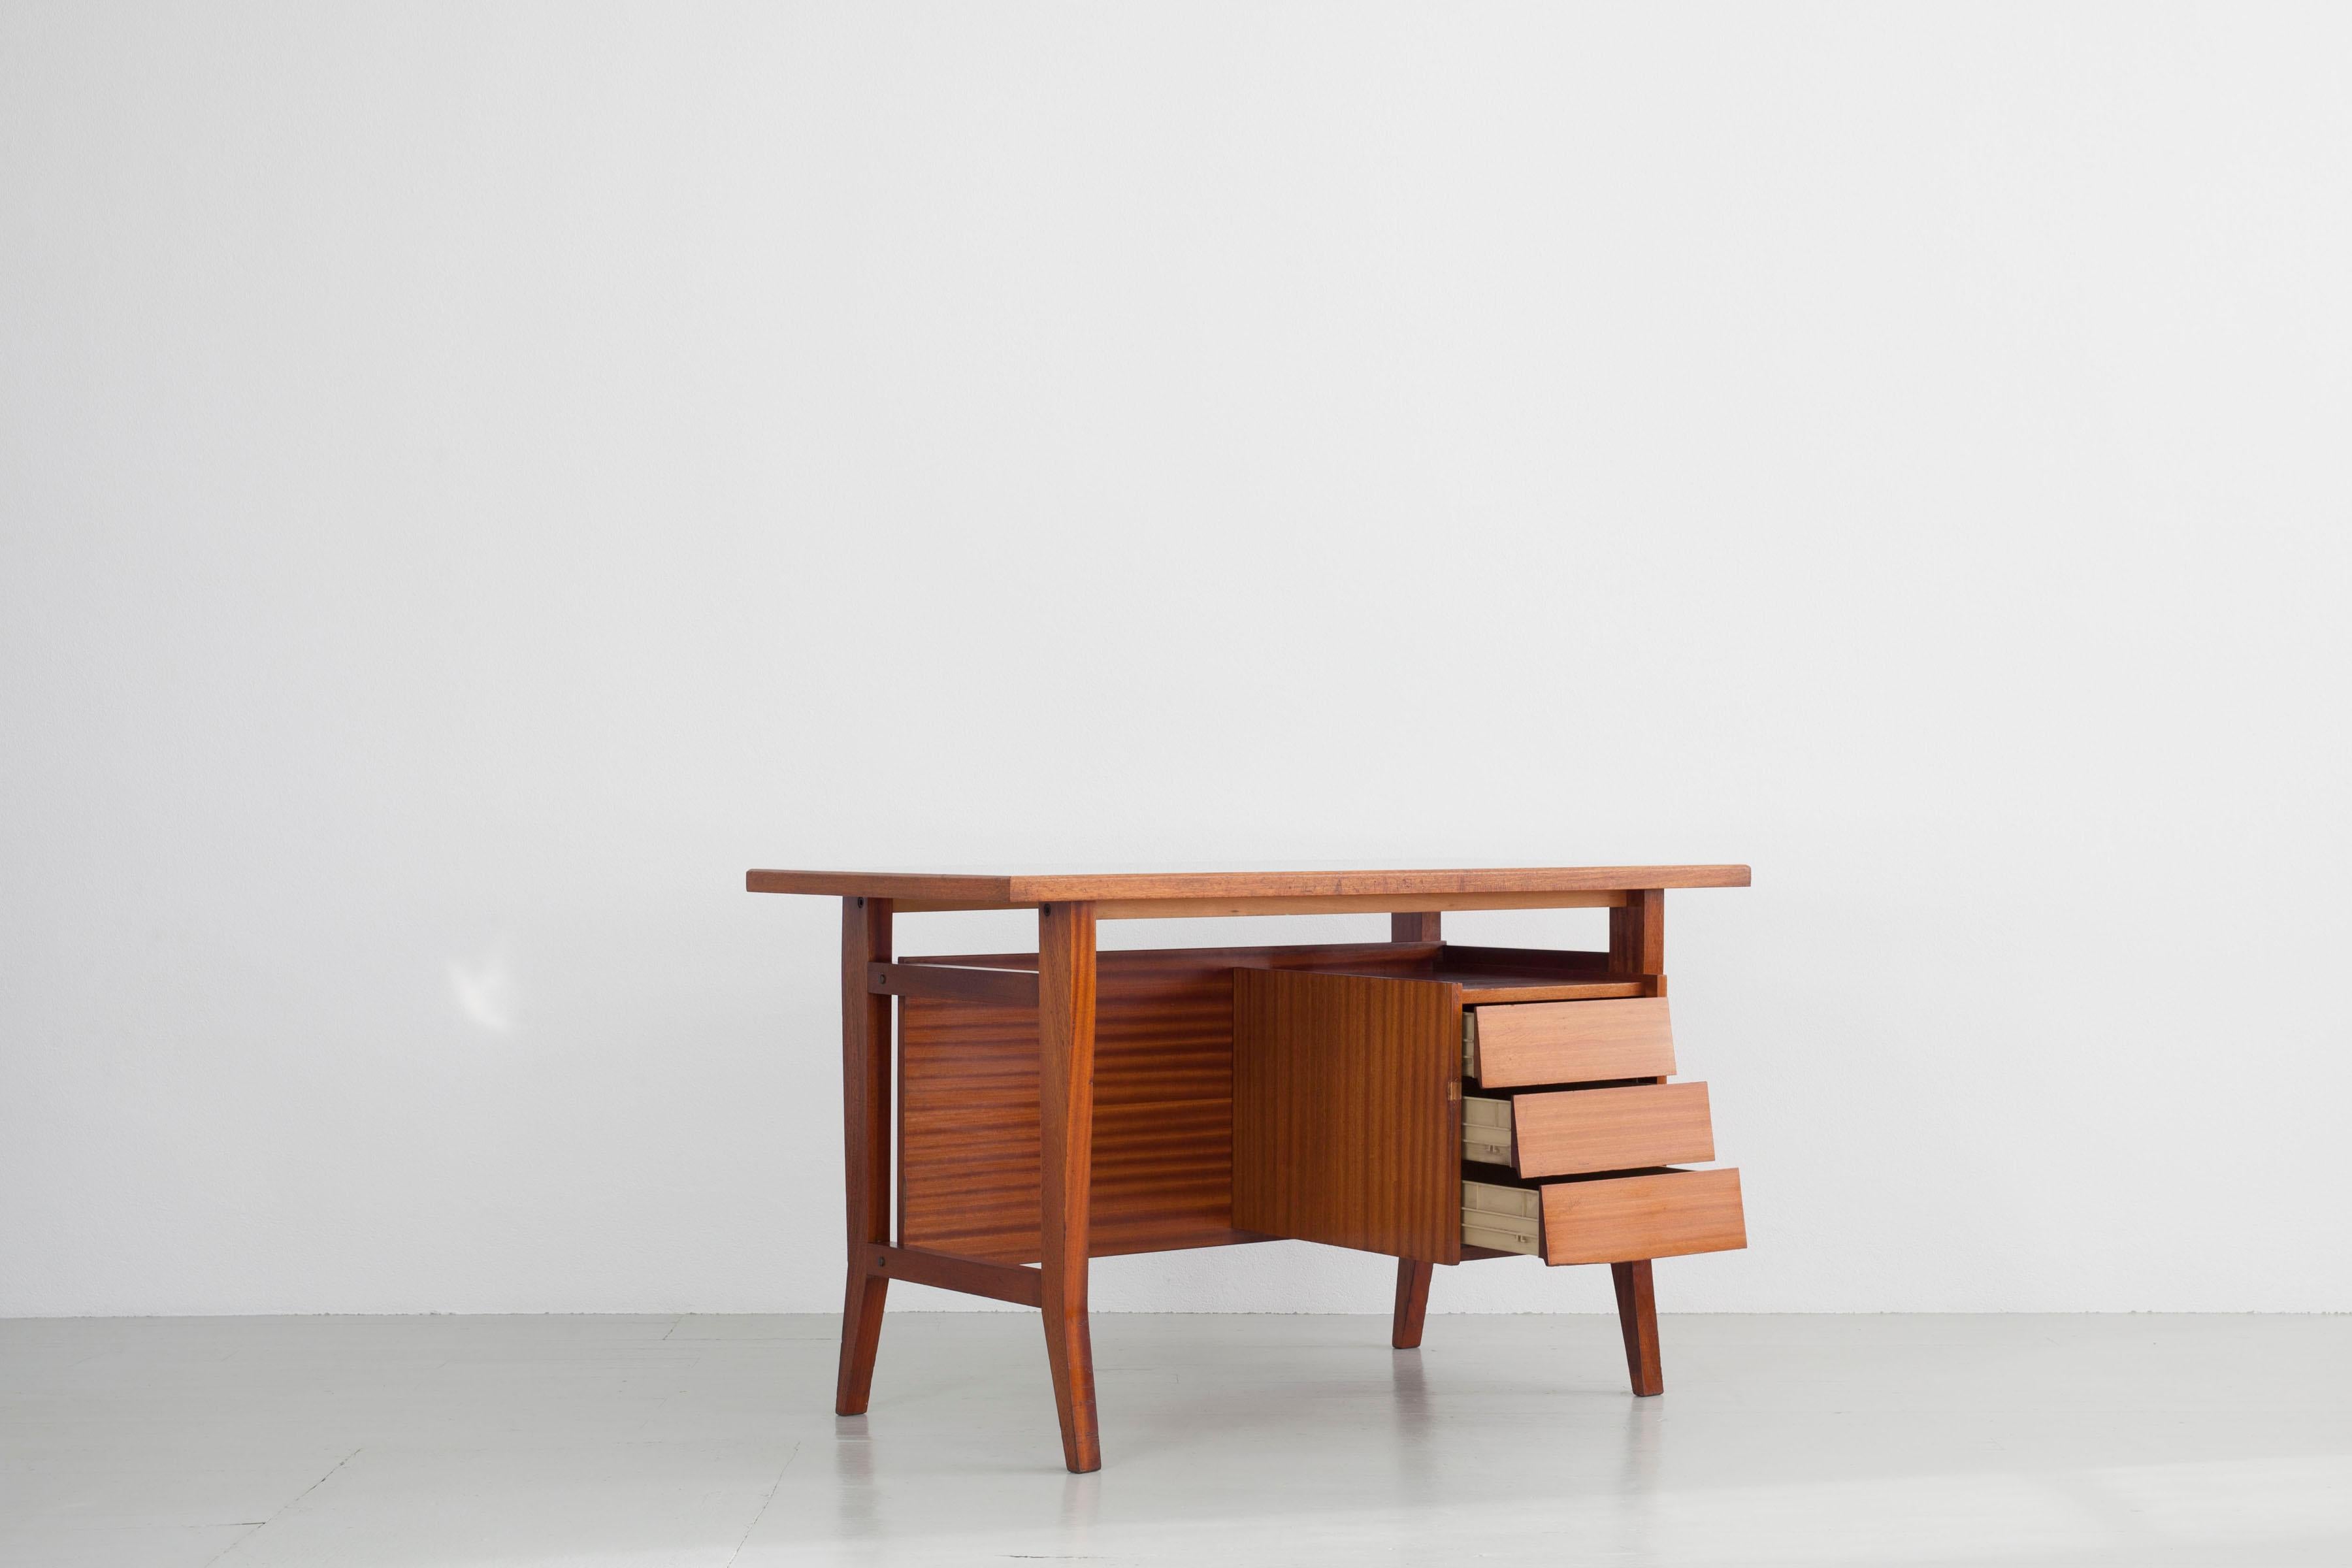 Desk design: Gio Ponti, Manufacturer: Scirolli, Italy, 1960s

This beautiful wooden desk of angular linear shapes is in original condition and has a drawer element. The inset gray-green laminate top has light scratches, and a small veneer repair has